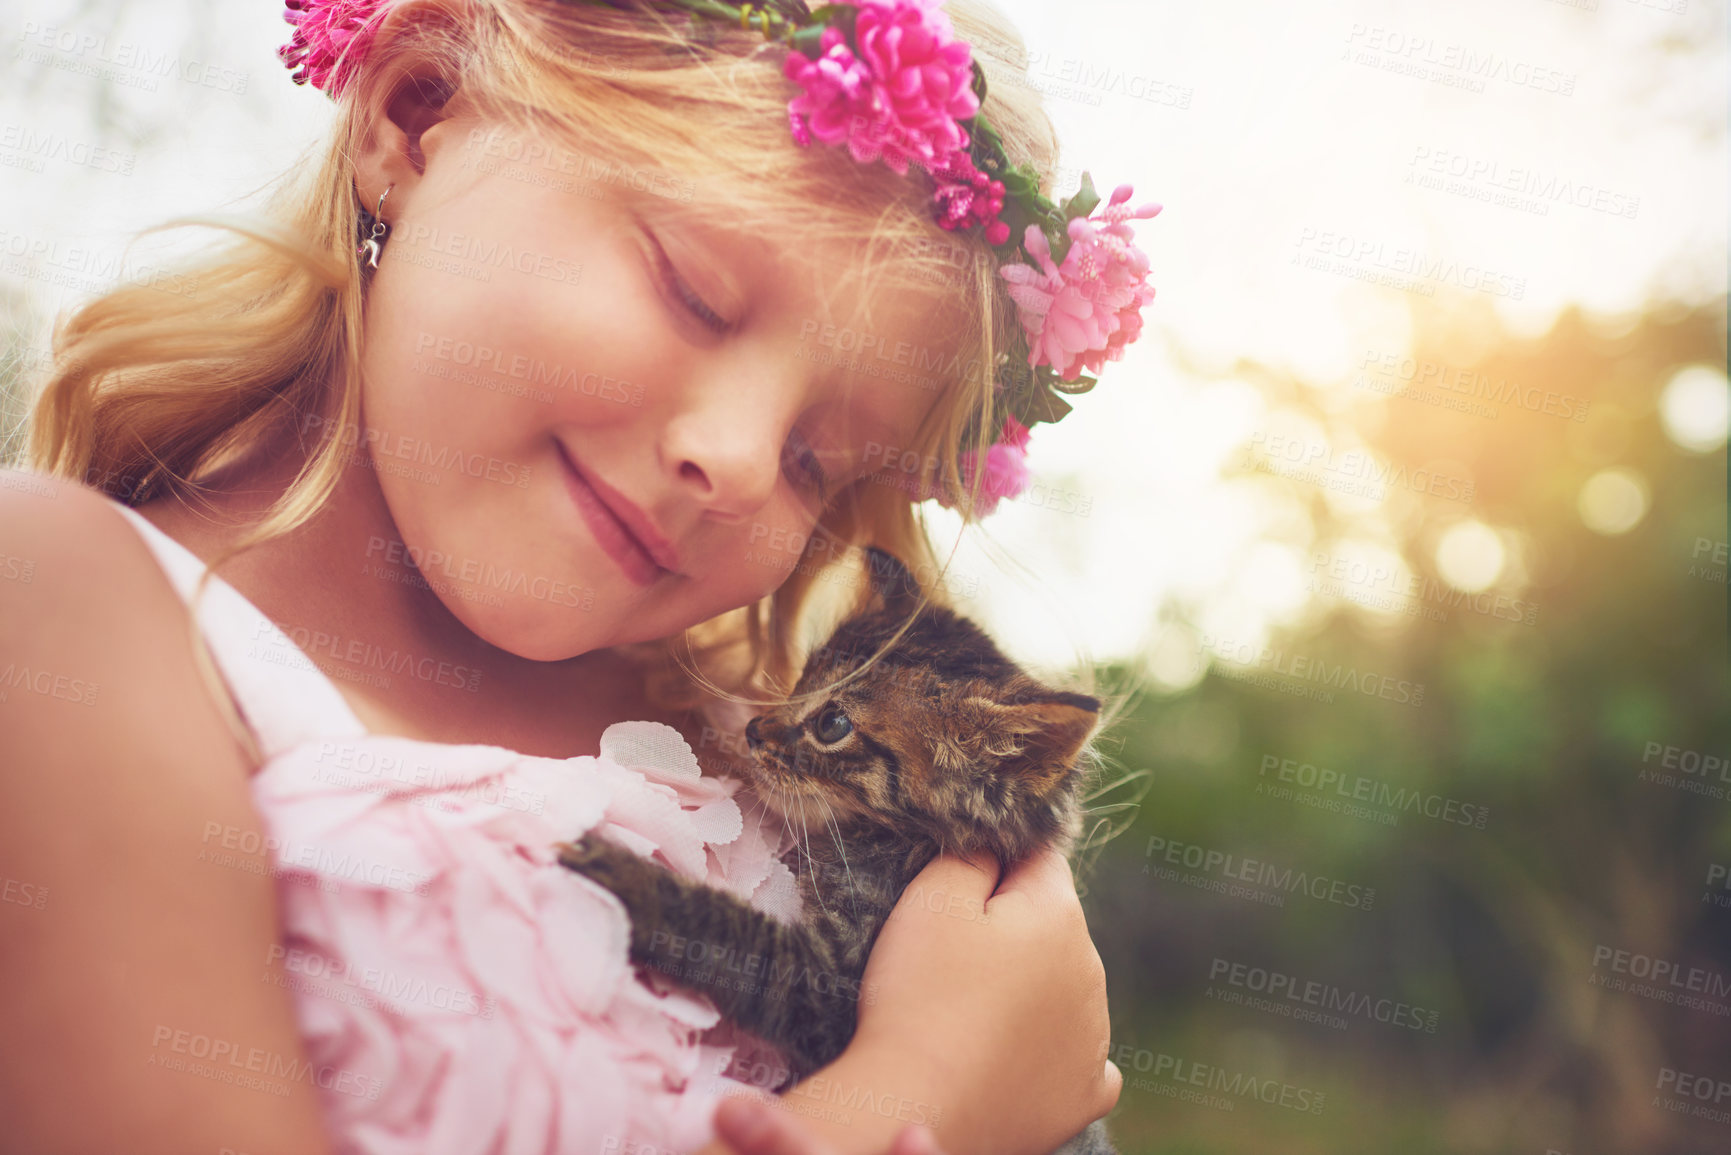 Buy stock photo Shot of a happy little girl holding a kitten and smiling while sitting outside in nature